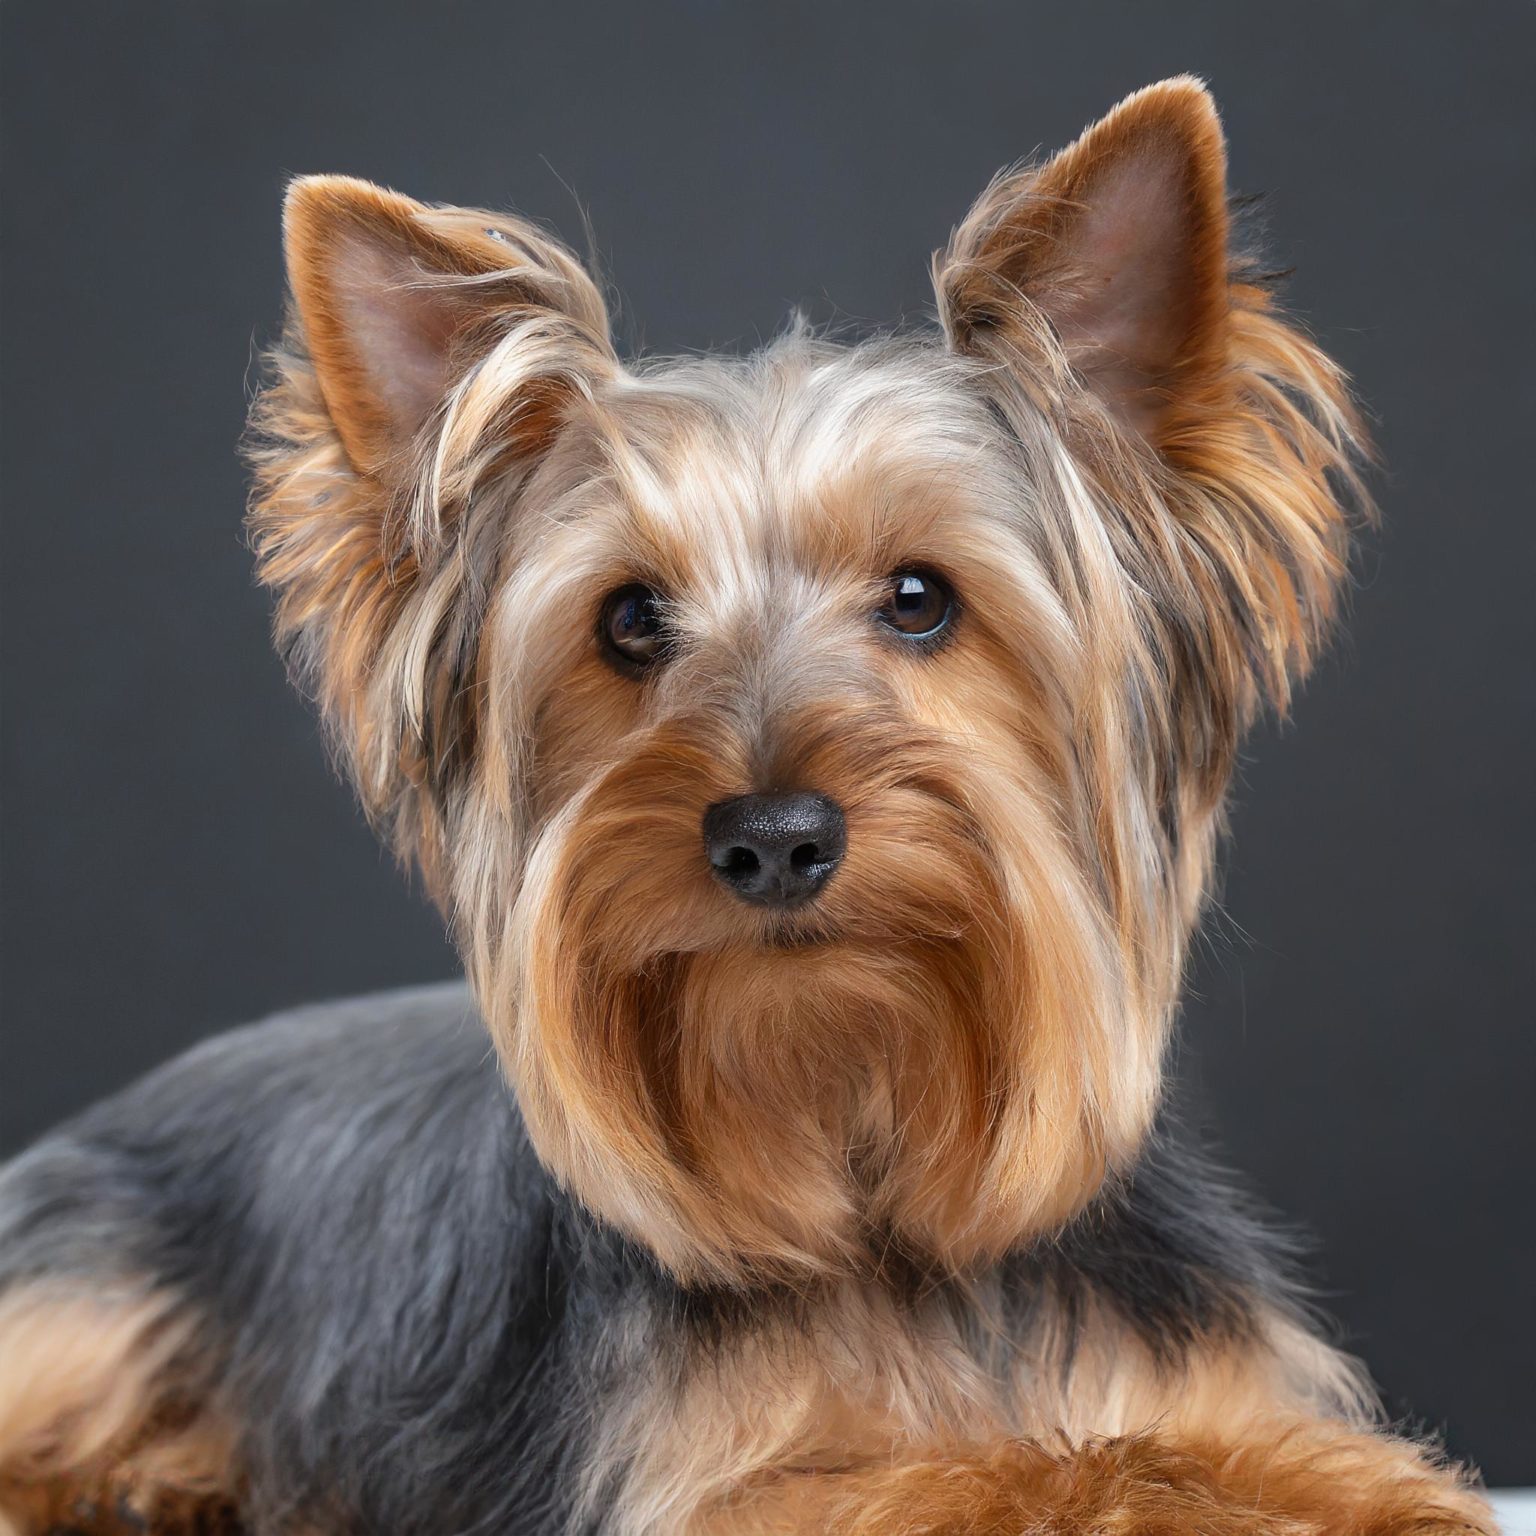 A close up of the adorable australian silky terrier